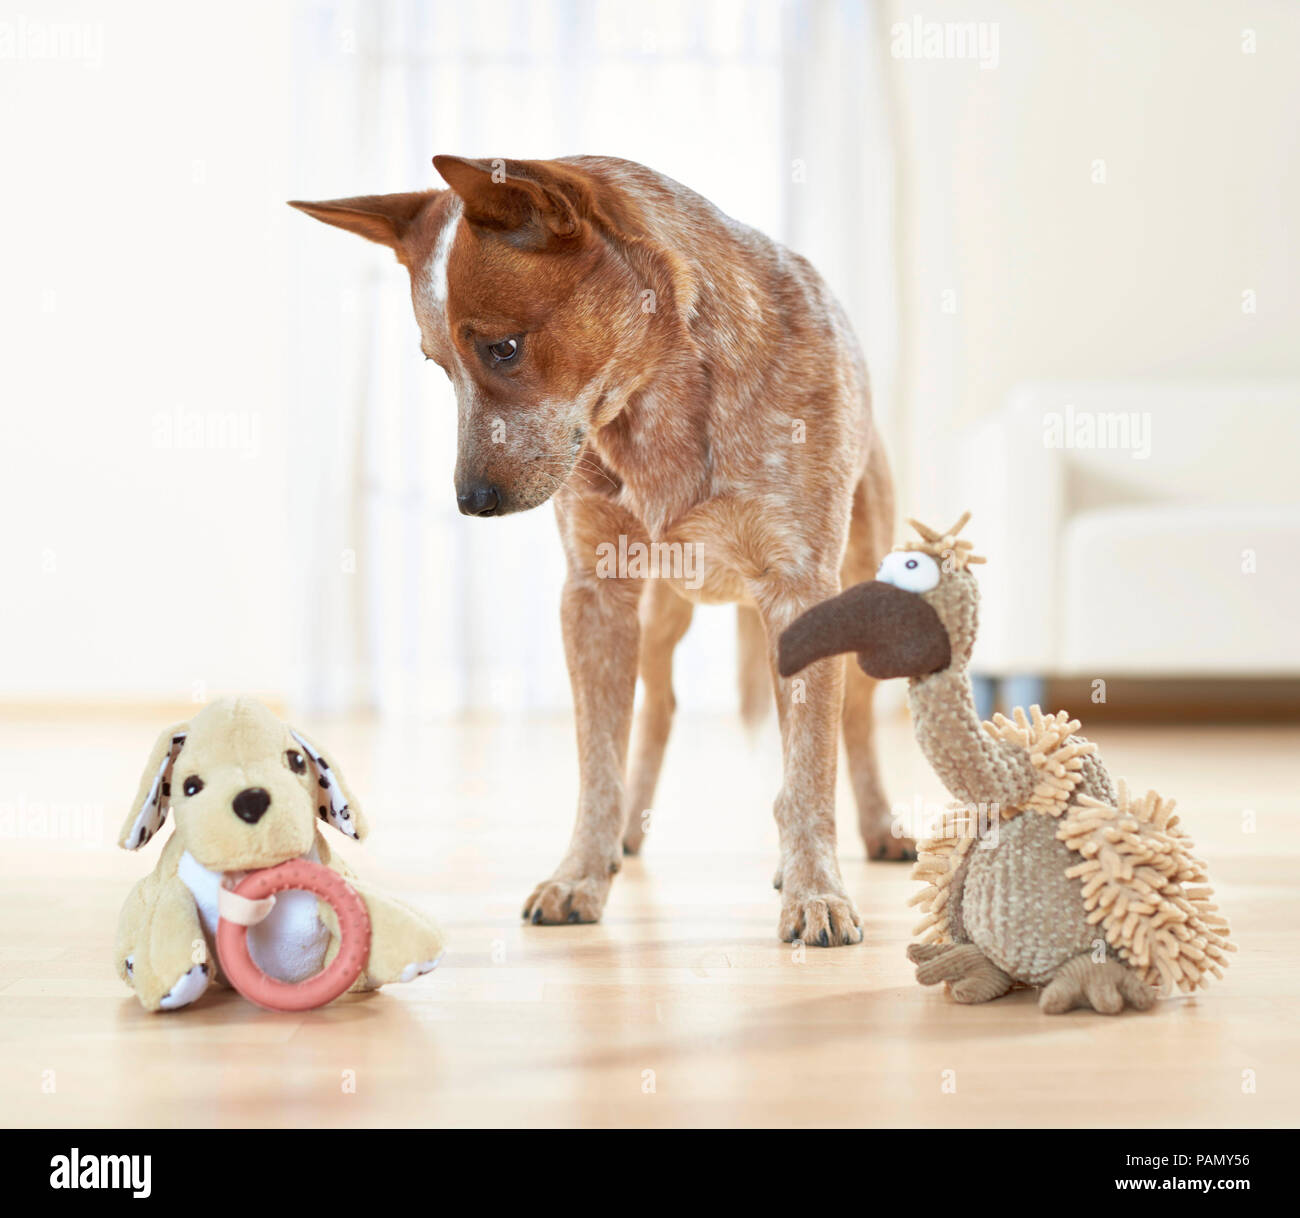 Australian Cattle Dog. Adult suspiciously looks at two plush animals. Germany.. Stock Photo